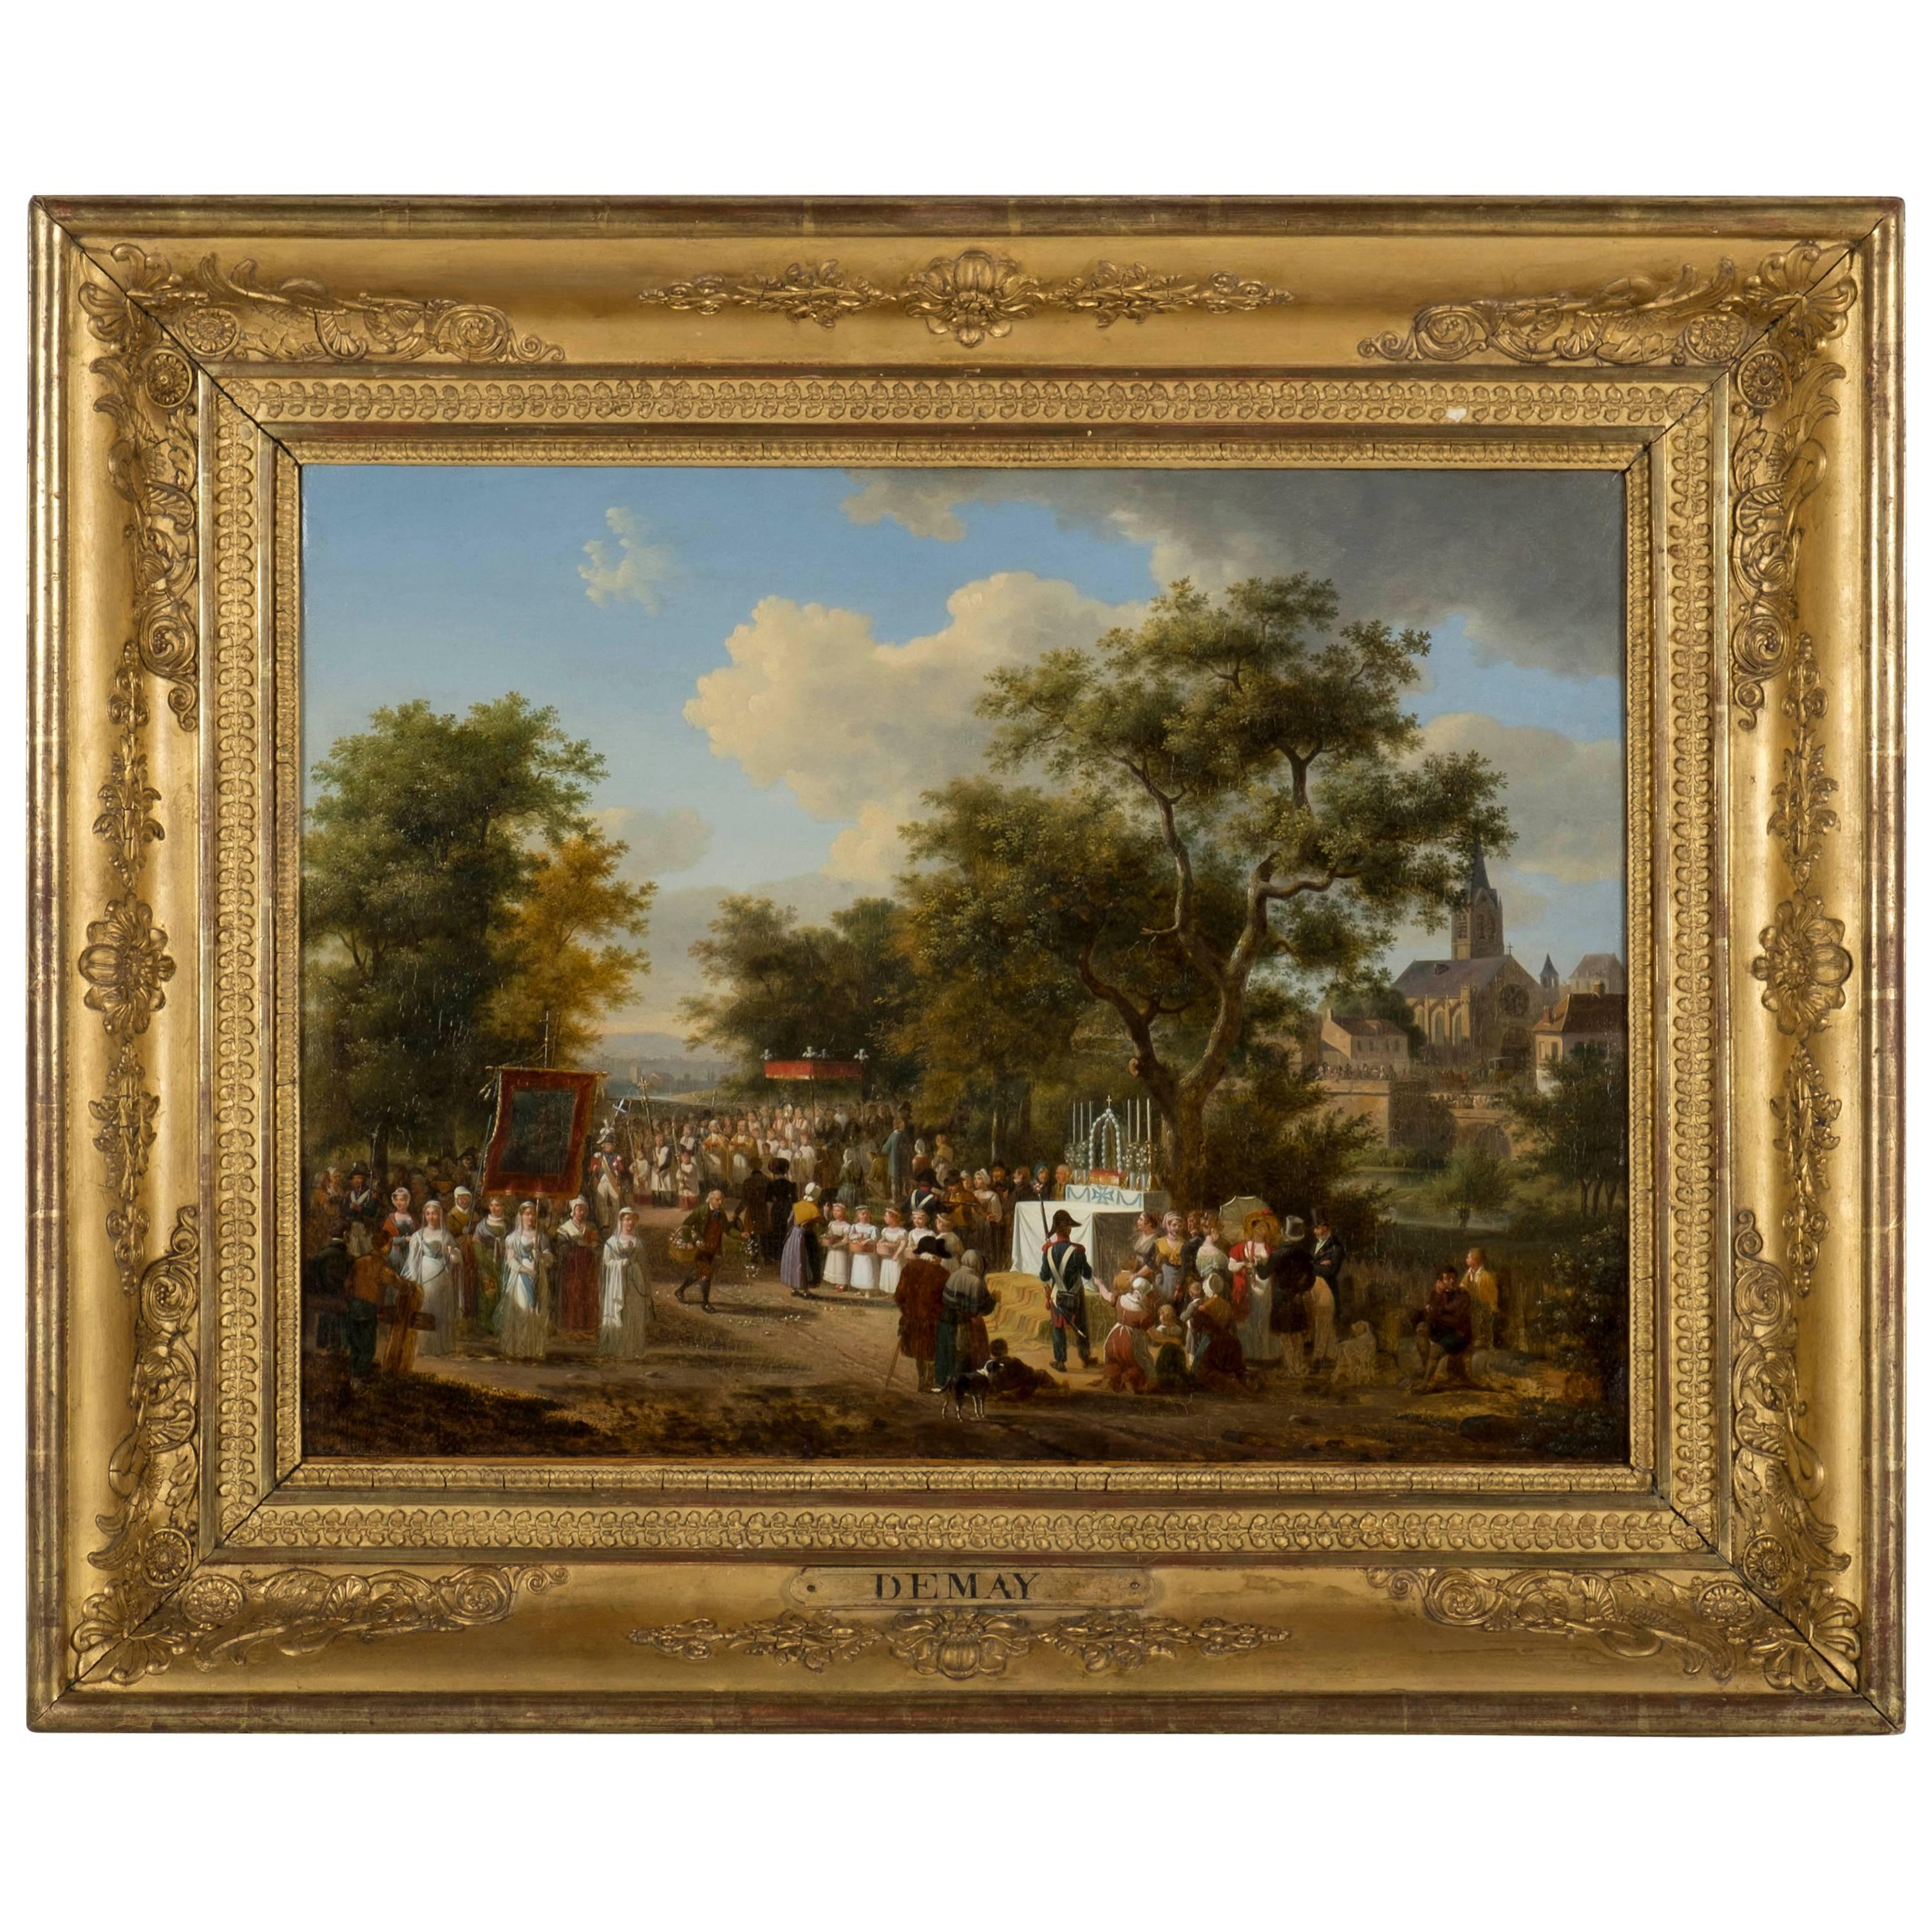 Procession of the "Fête Dieu" in the Countryside, J.F. Demay For Sale